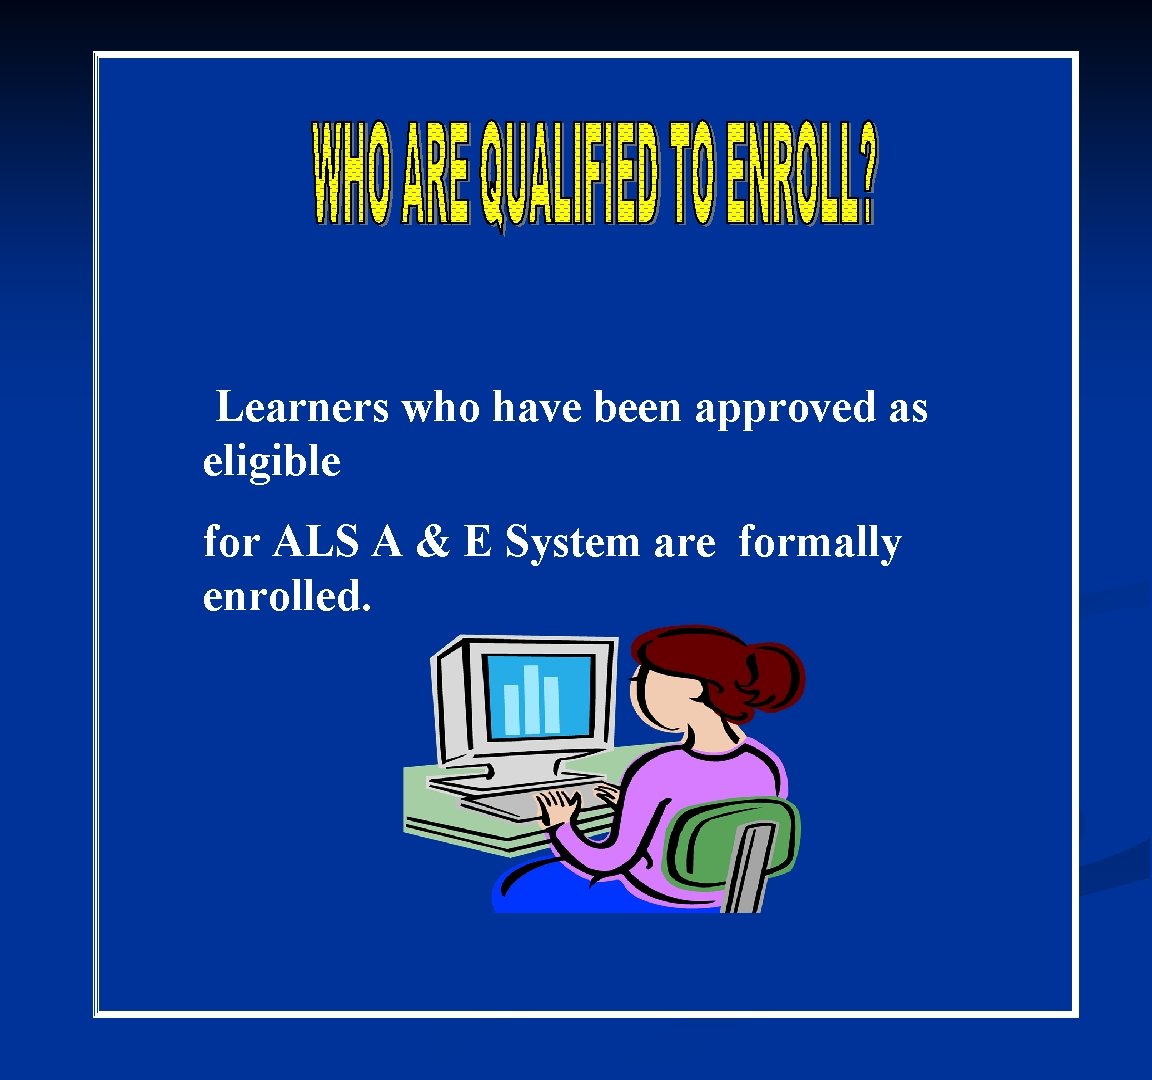 Learners who have been approved as eligible for ALS A & E System are